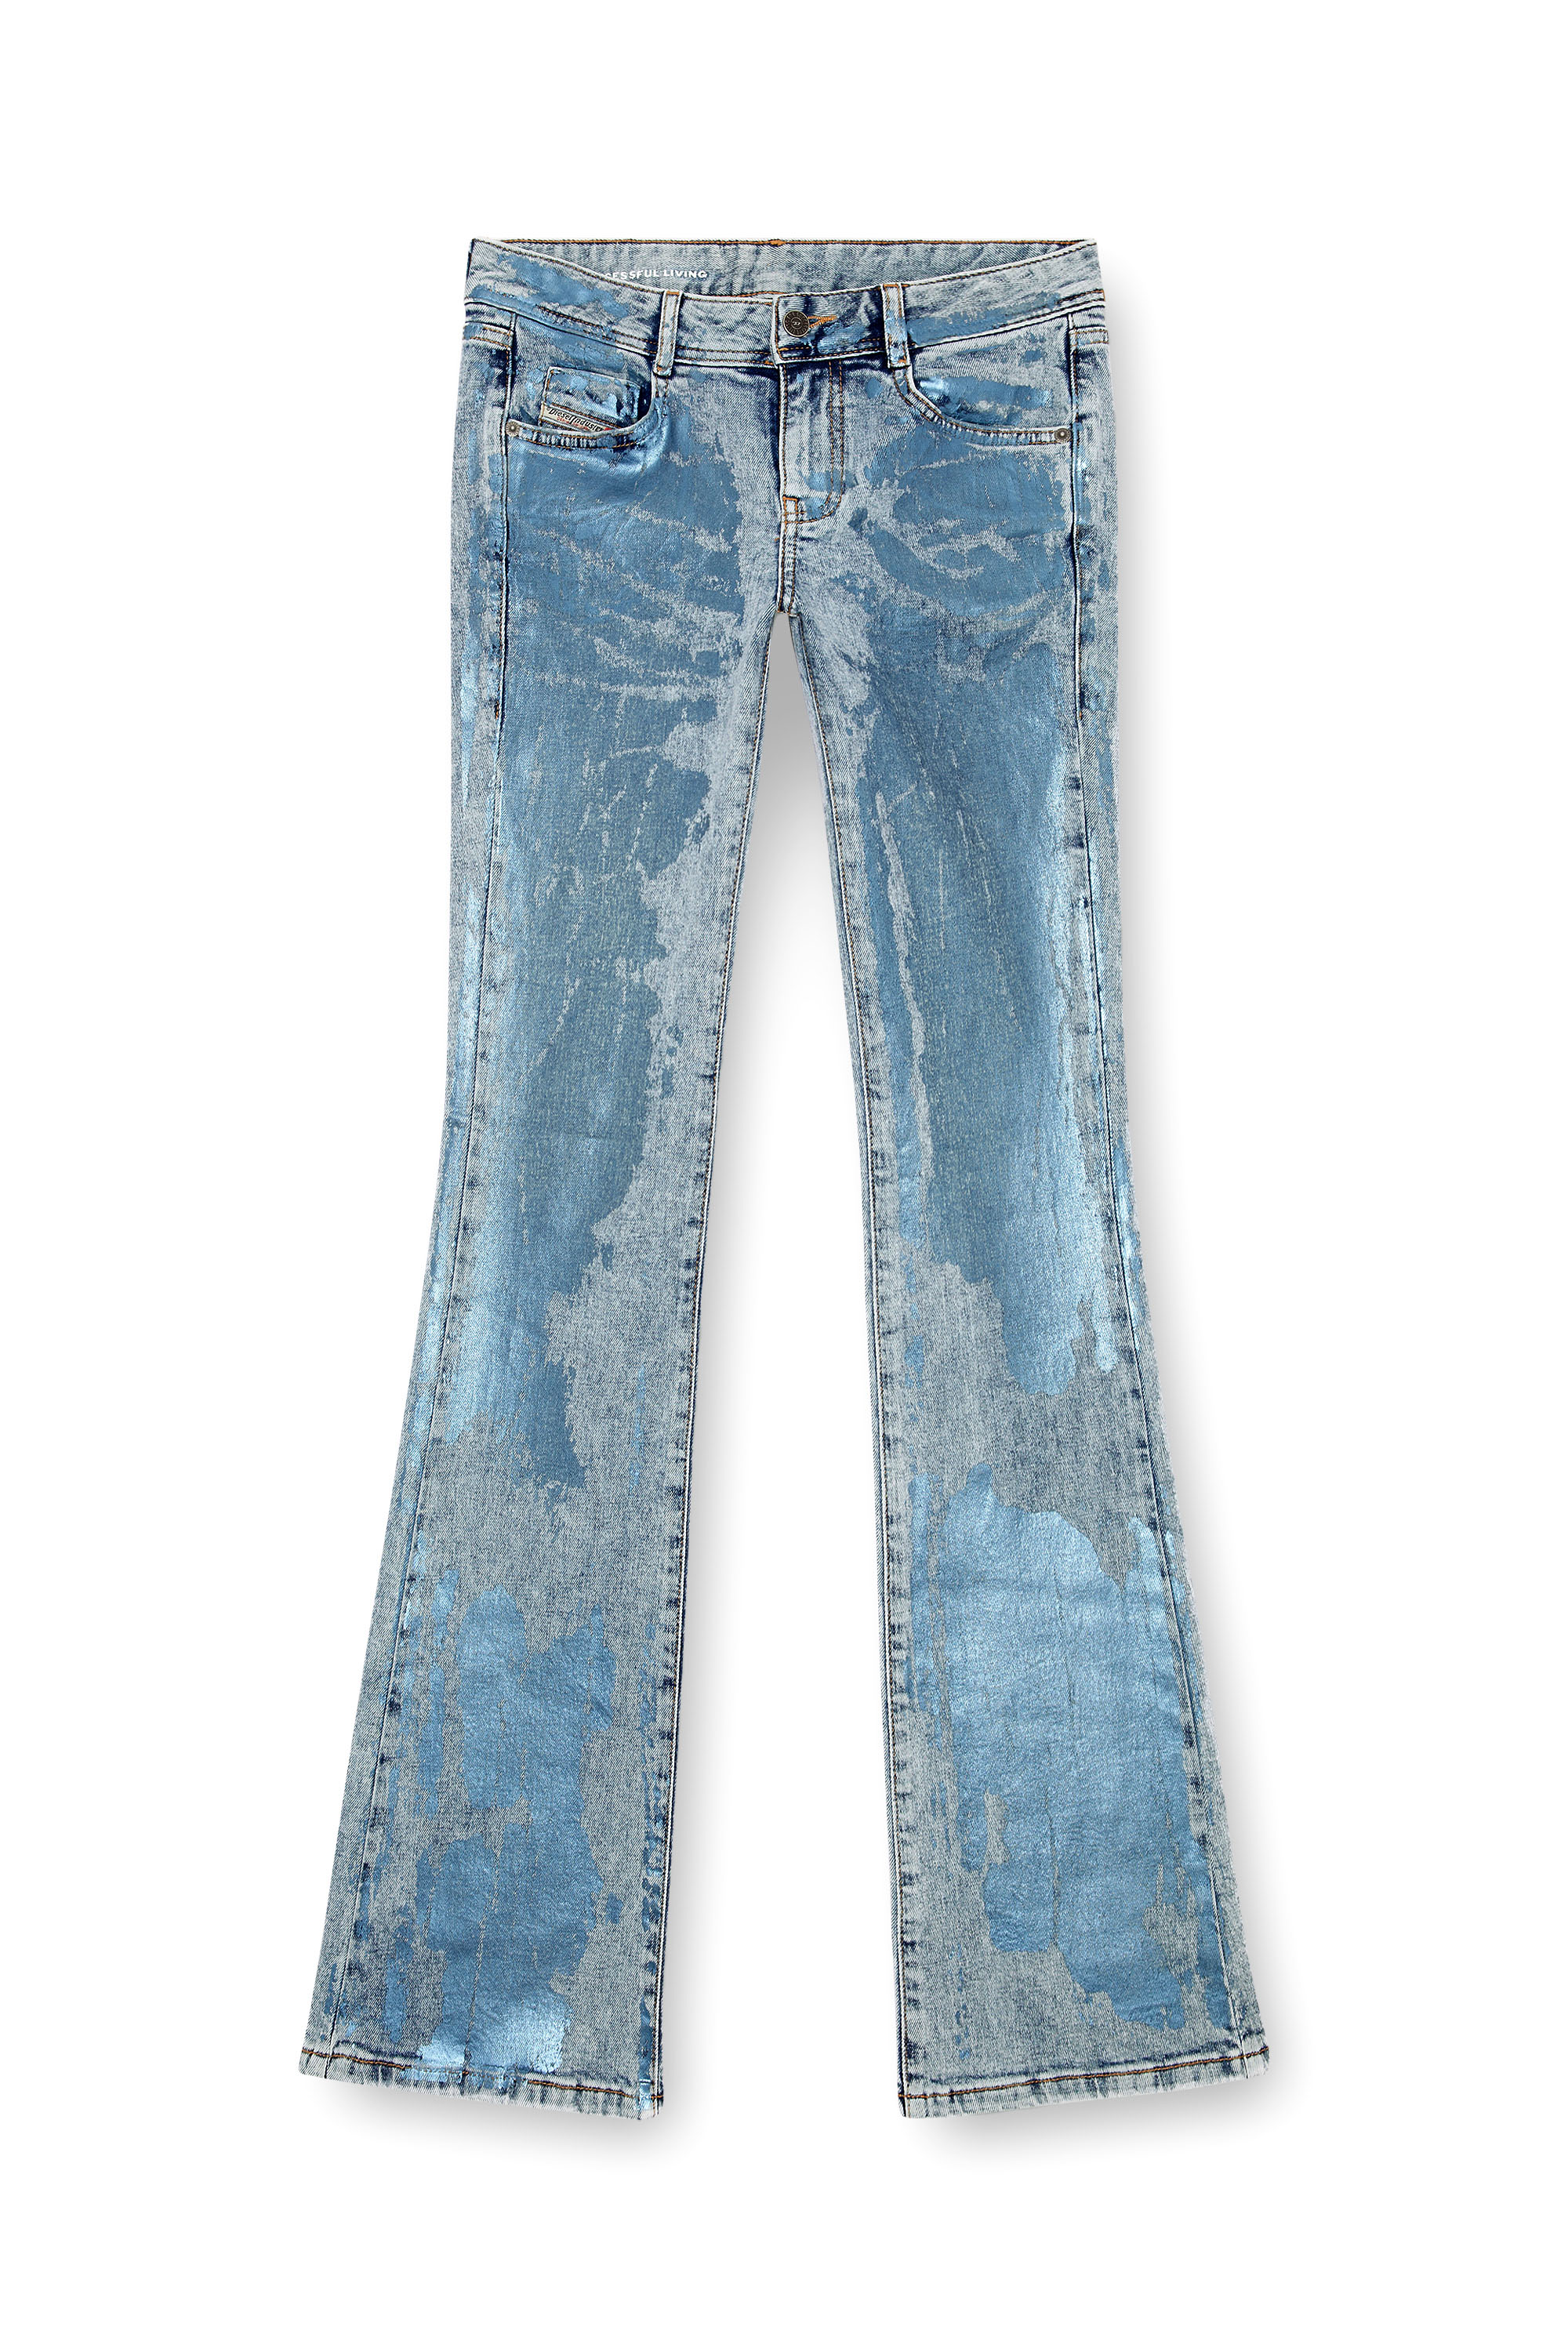 Diesel - Bootcut and Flare Jeans 1969 D-Ebbey 0AJEU, Mujer Bootcut y Flare Jeans - 1969 D-Ebbey in Azul marino - Image 1